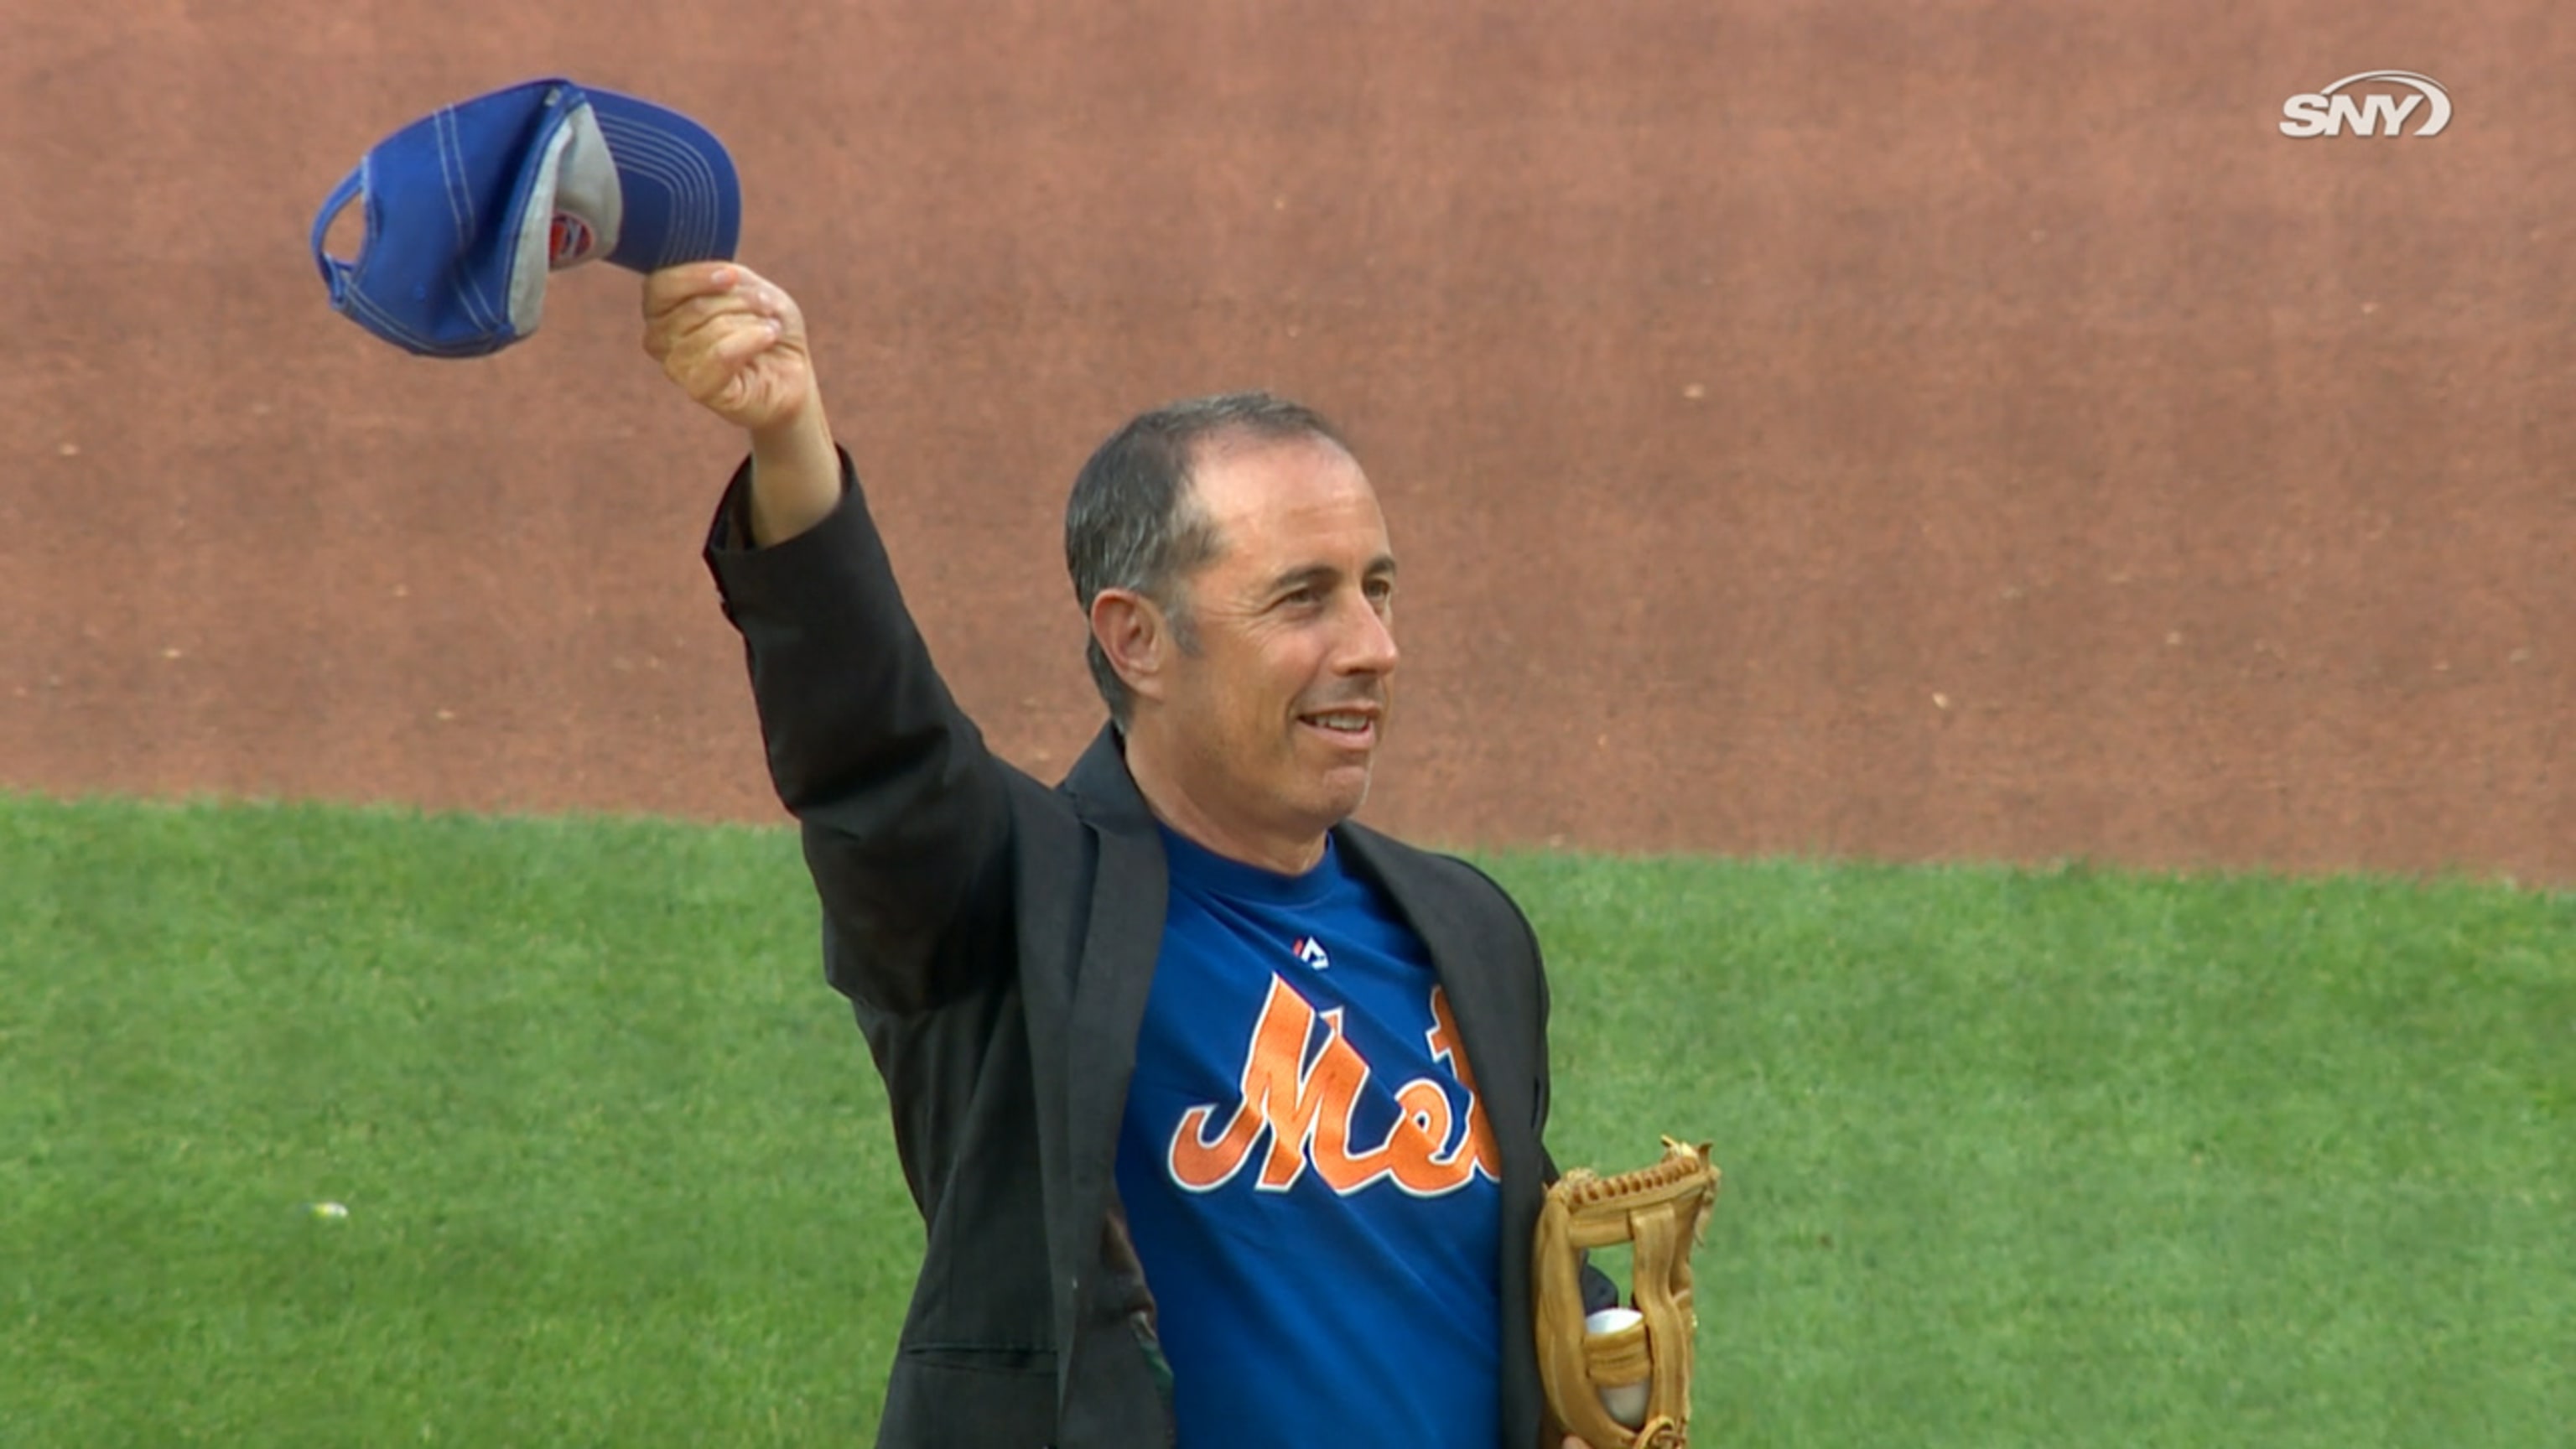 Seinfeld throws Mets first pitch with windup